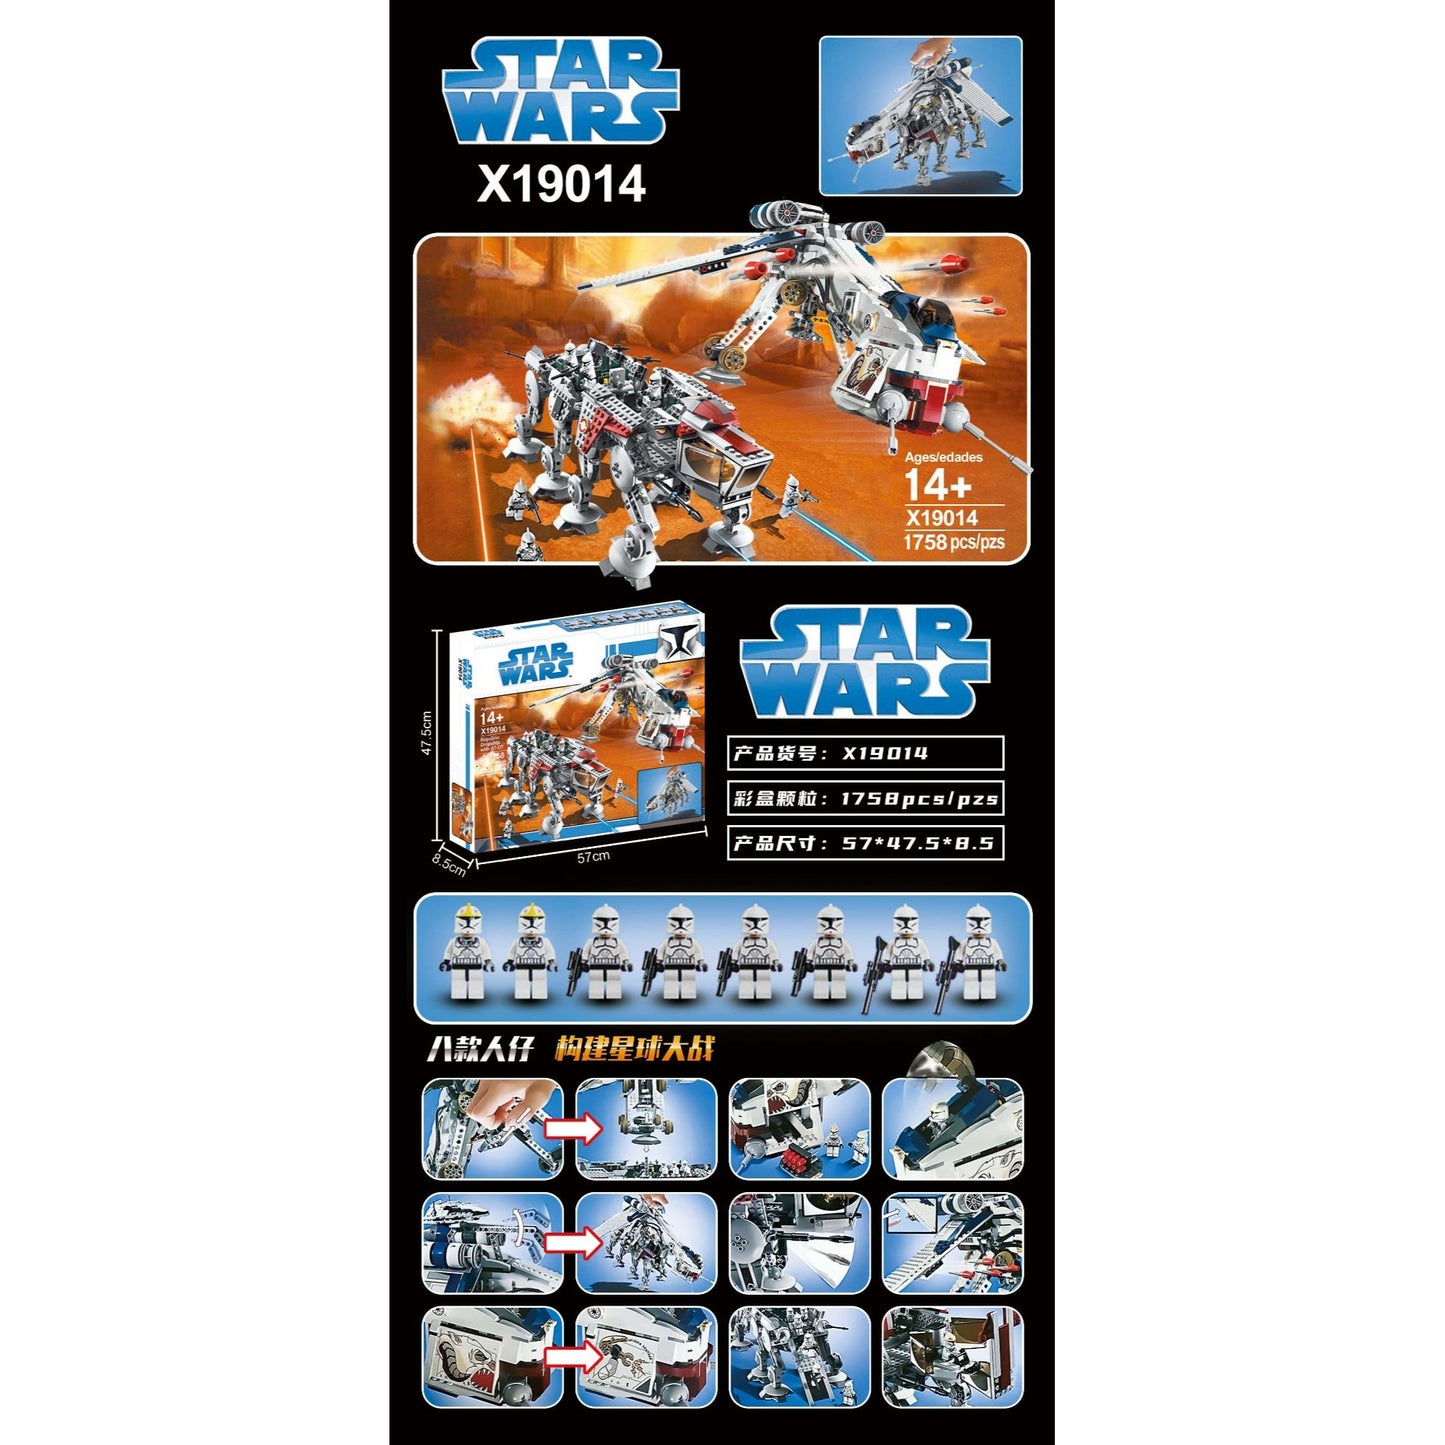 AT OT Carrier and Drop Ship, Star Wars, 1808 pcs, New, Lego Compatible